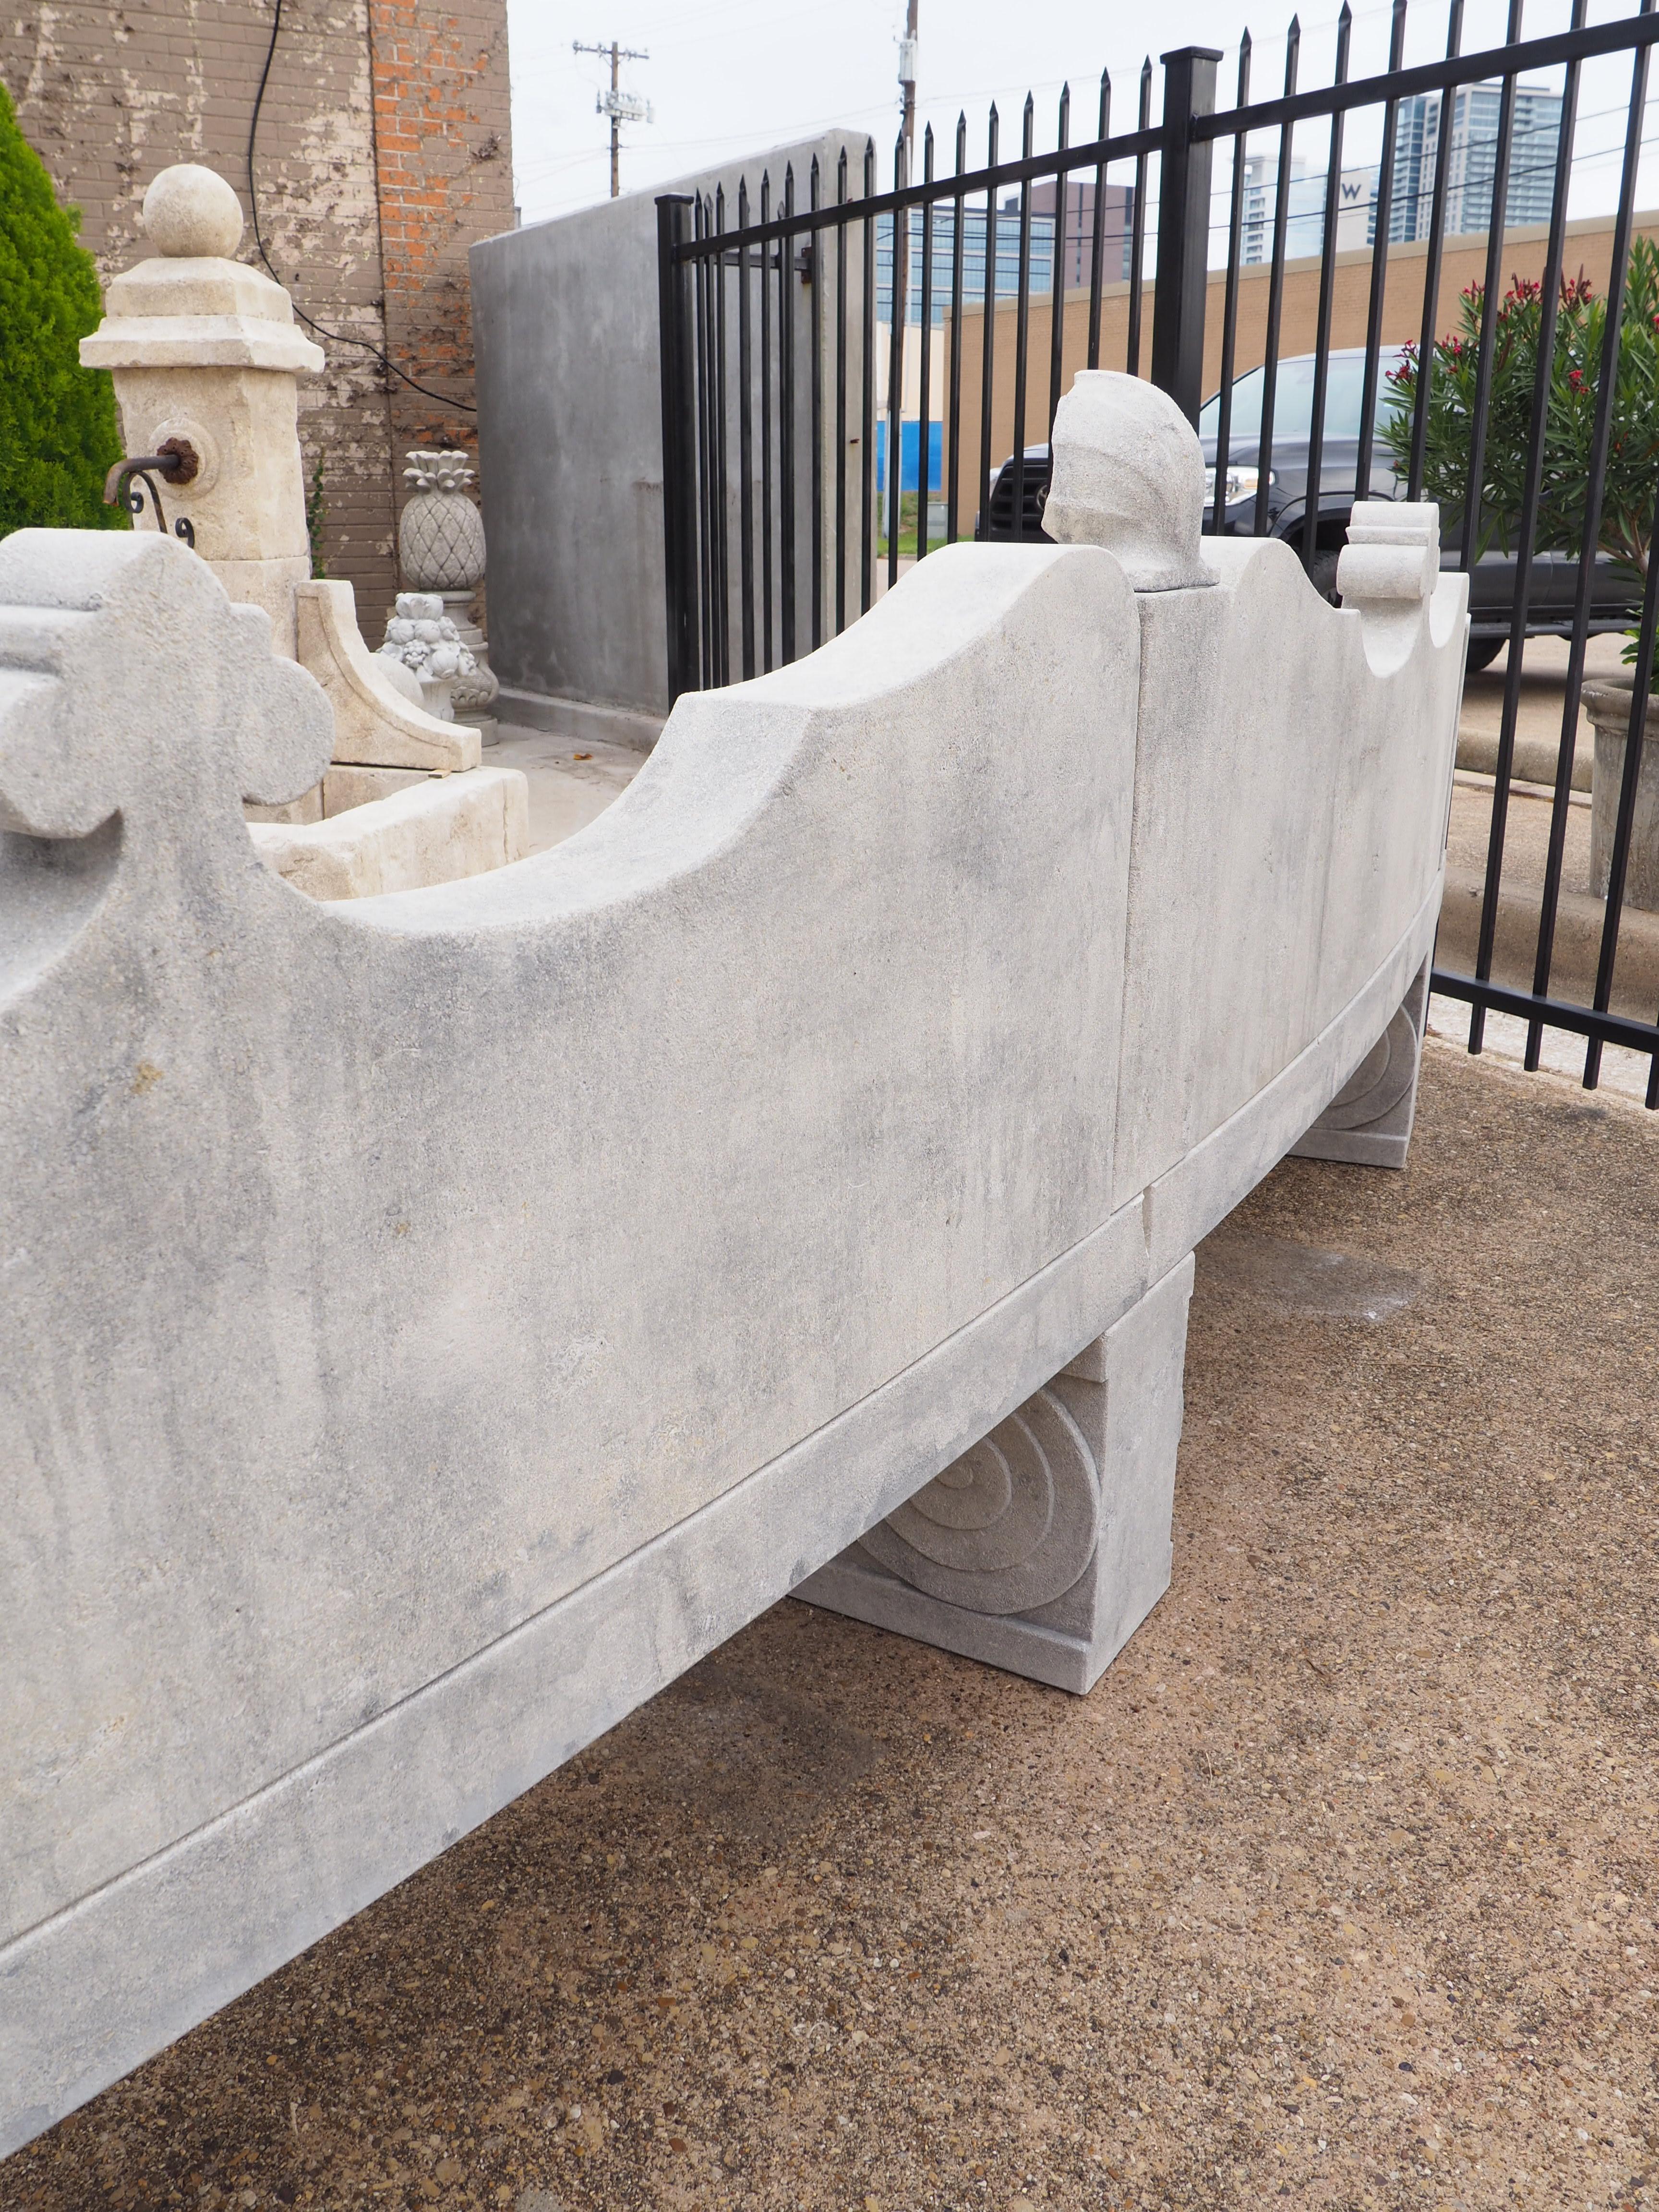 This beautiful garden bench consists of 10 limestone pieces that have been hand-carved by a skilled Italian stone mason. The sinuously shaped back has volute scroll elements with two fleur de lys points flanking a central scalloped shell finial.